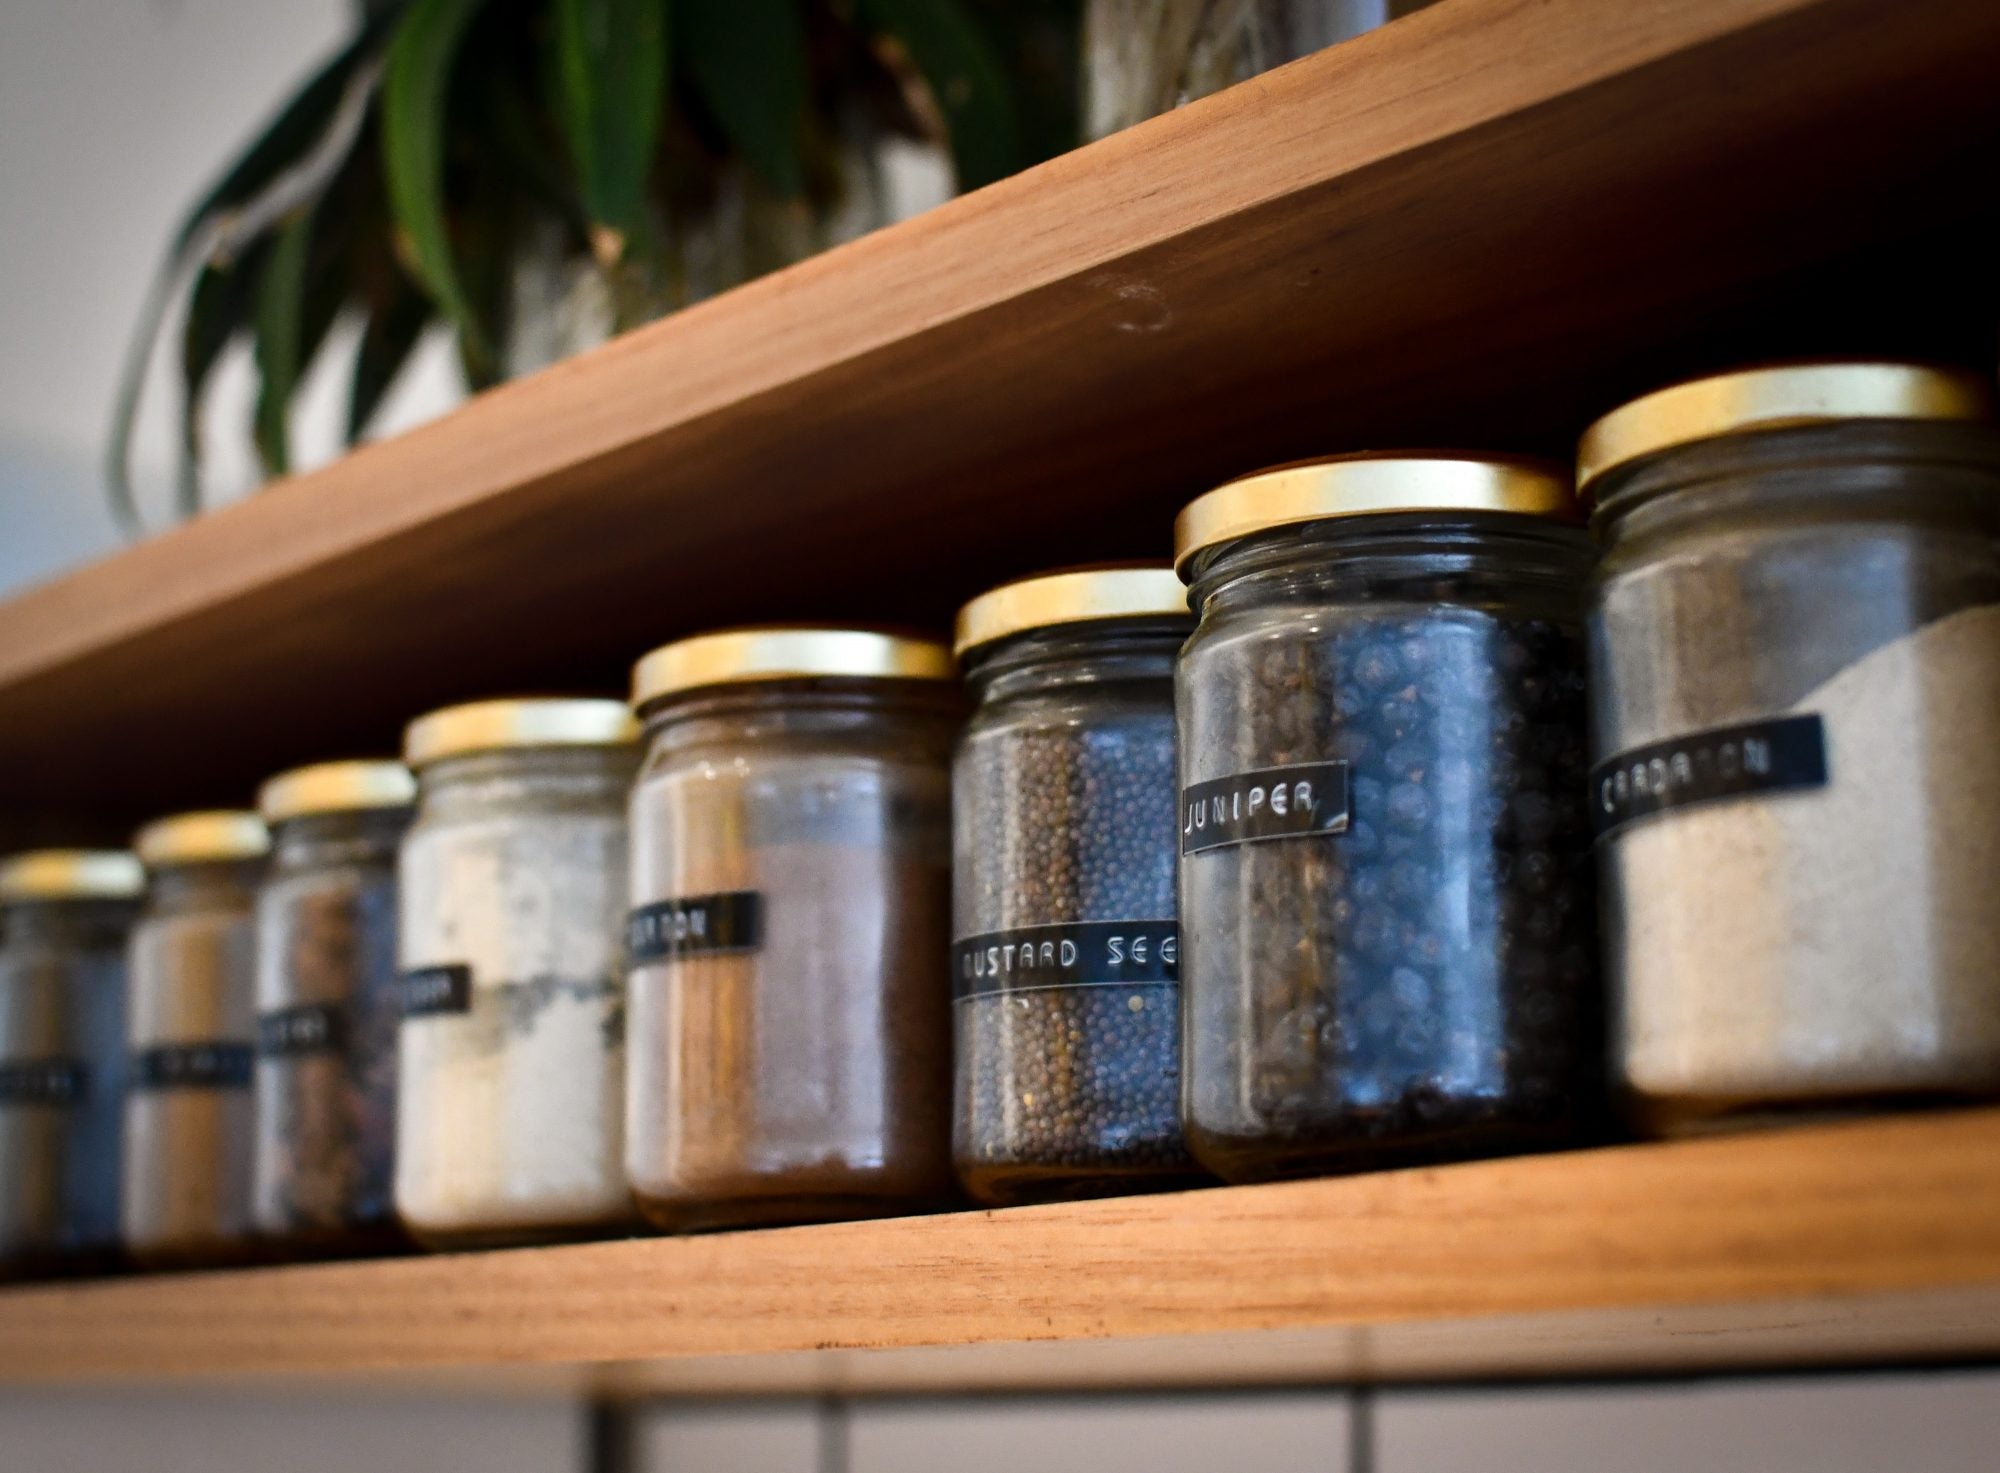 Storing Your Spices In Plastic Containers Will Ruin Their Shelf Life